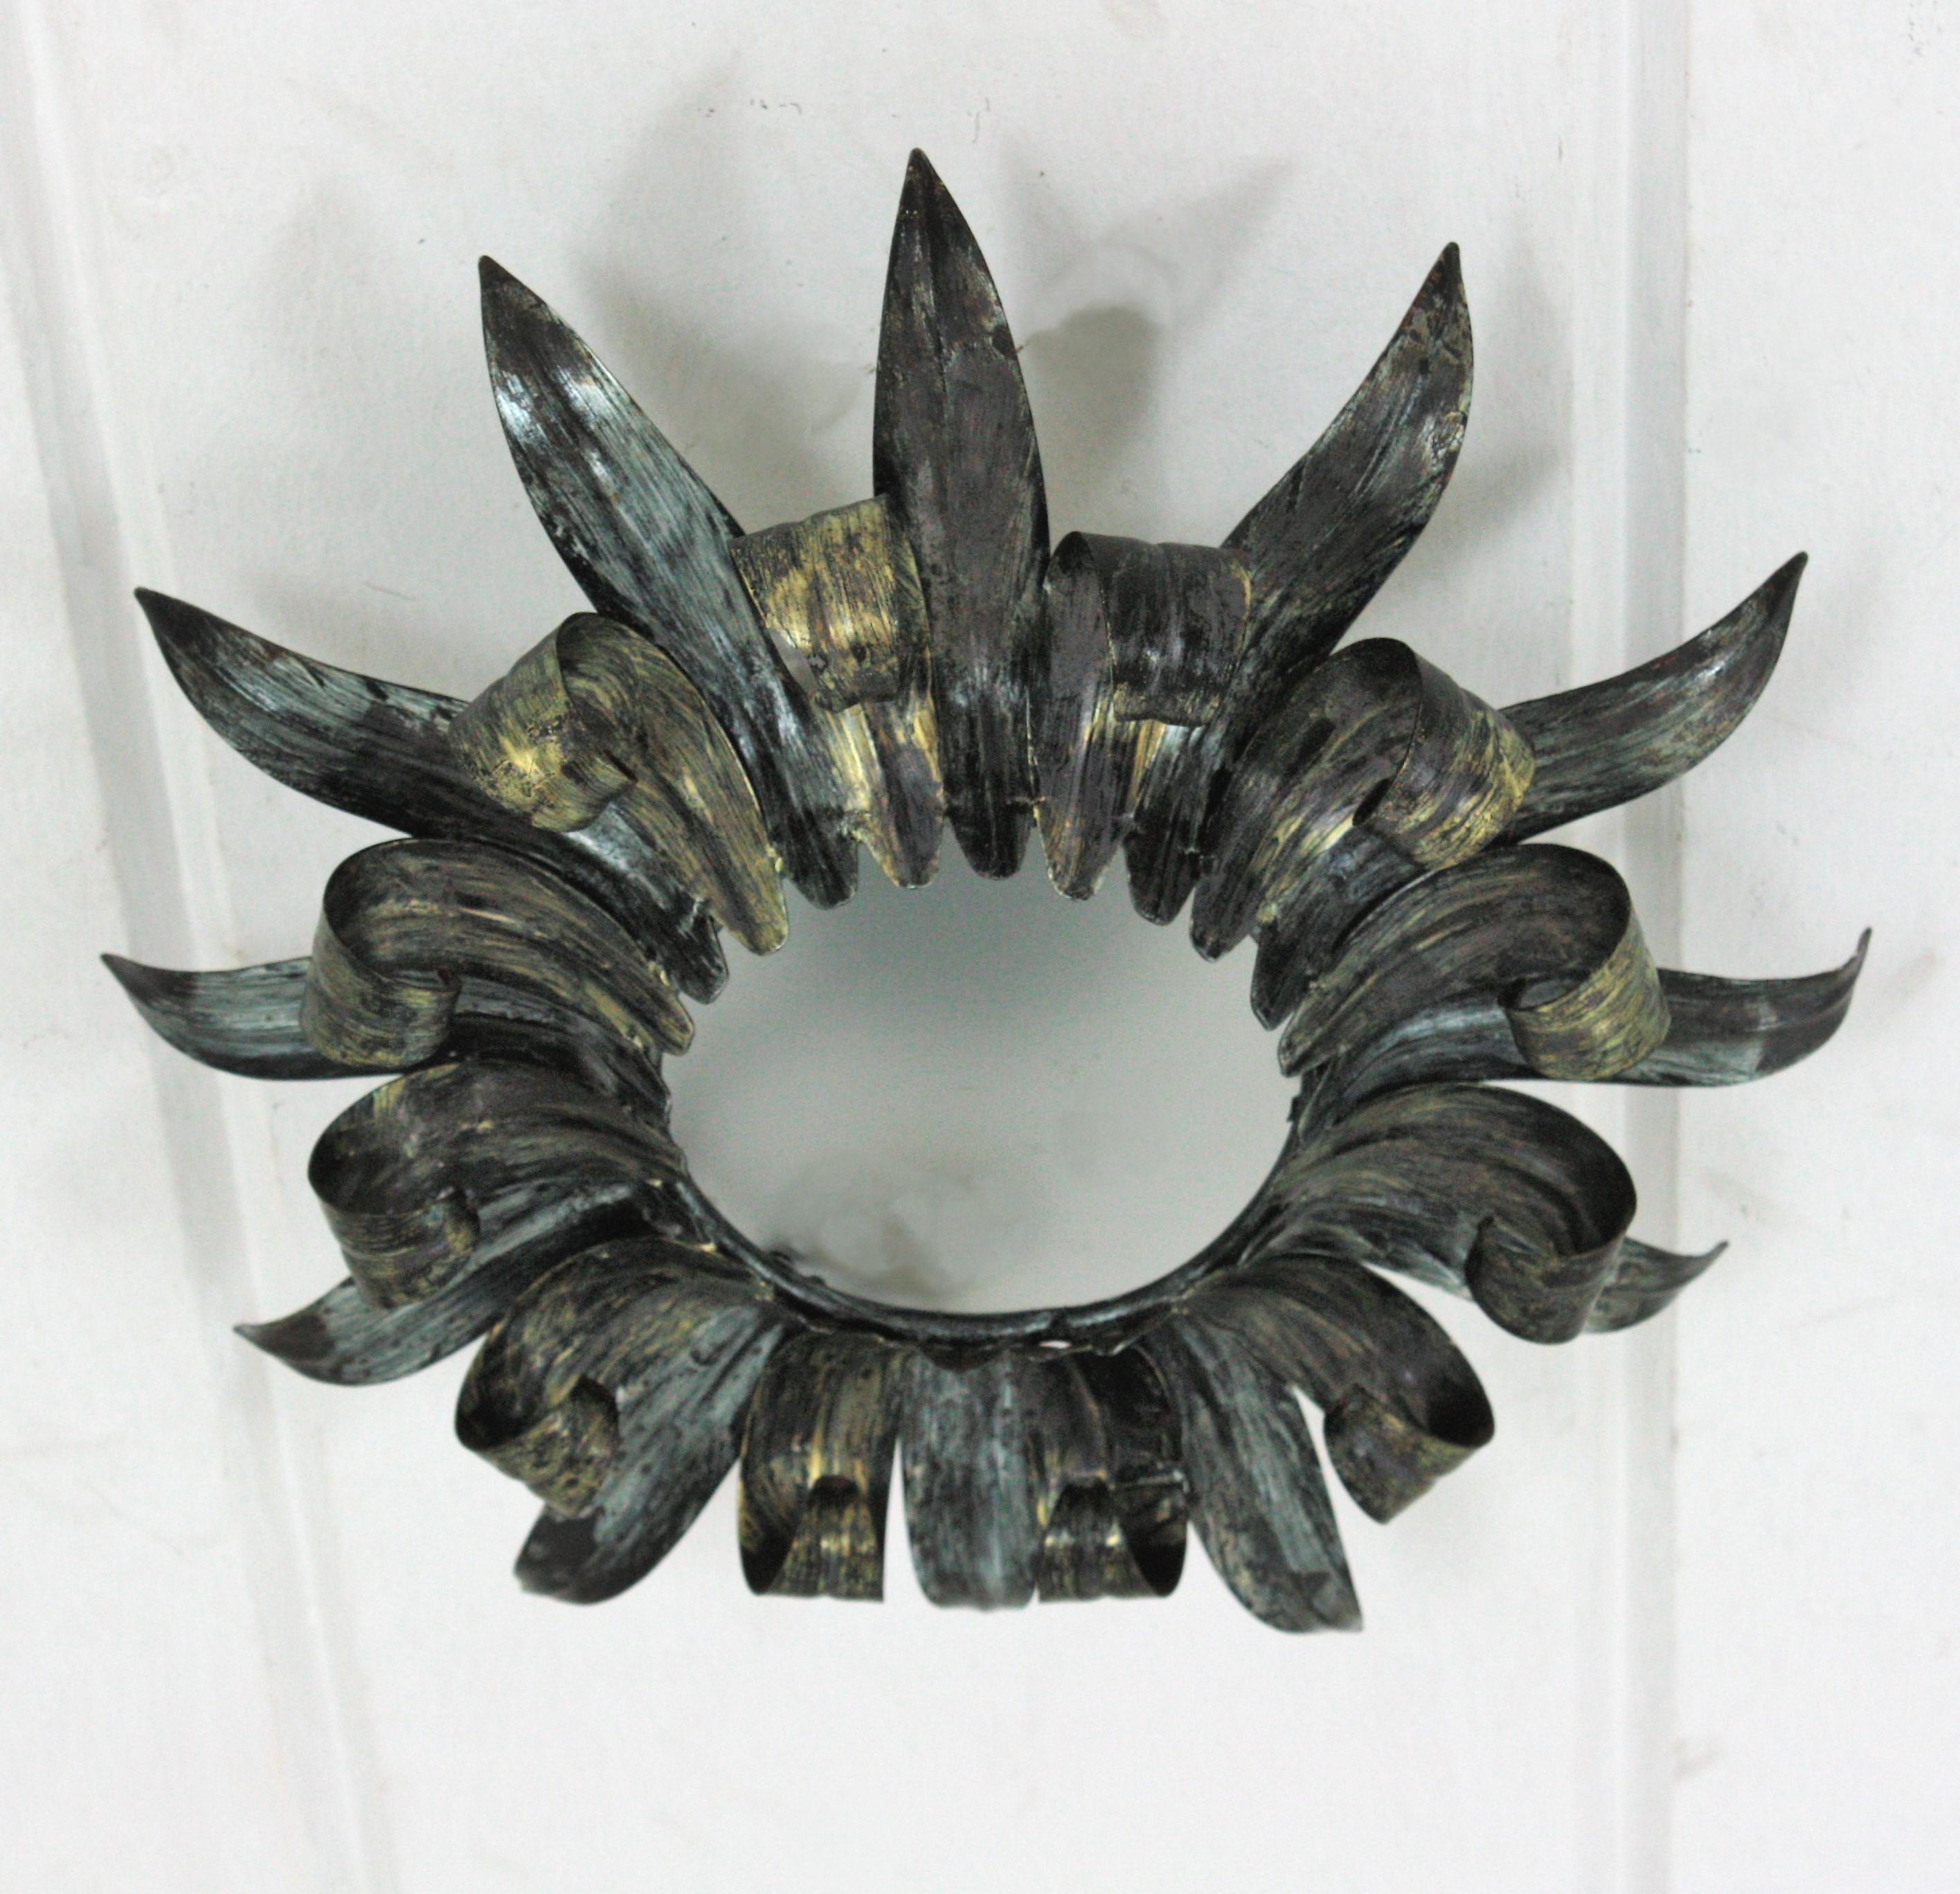 Brutalist patinated metal silvered sunburst light fixture, France, 1950s.
Eye-catching iron sunburst flush mount with frosted glass shade. It has alternating rays in eye-lash shape. Patinated in two-tone, silver color with golden accents. Nice aged